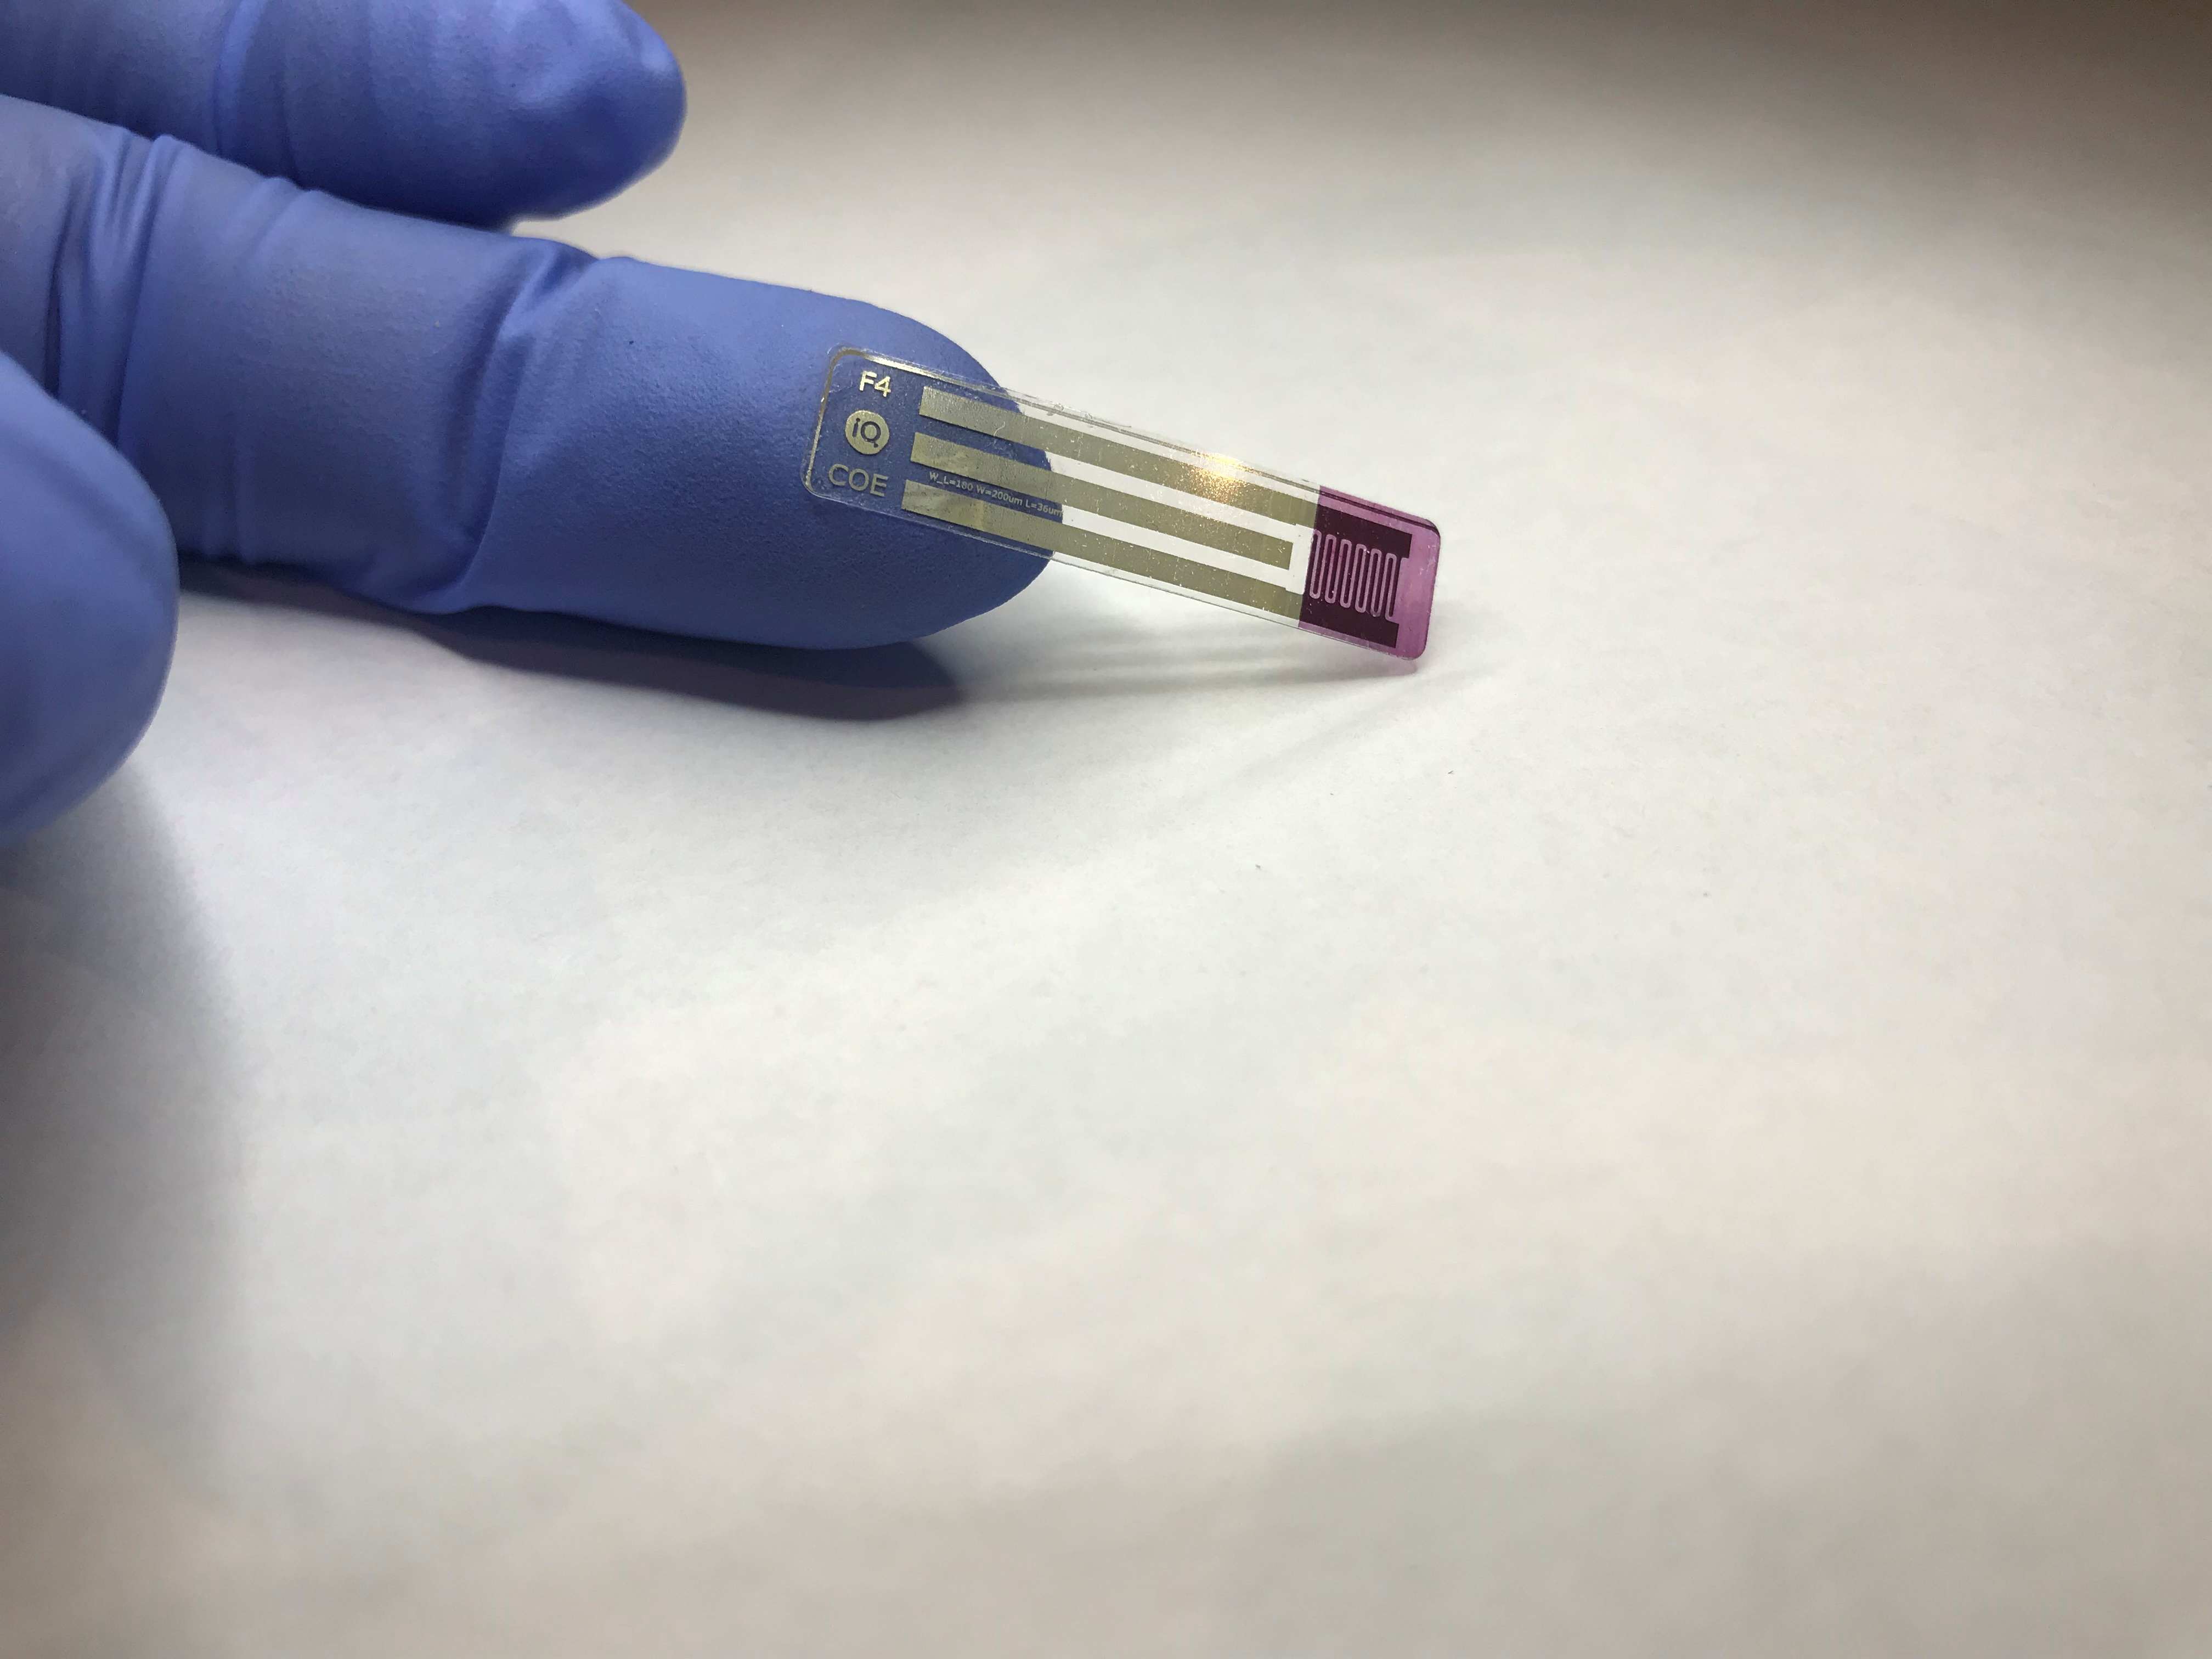 A non-invasive, printable saliva test strip for diabetics is seen at the University of Newcastle  in Australia